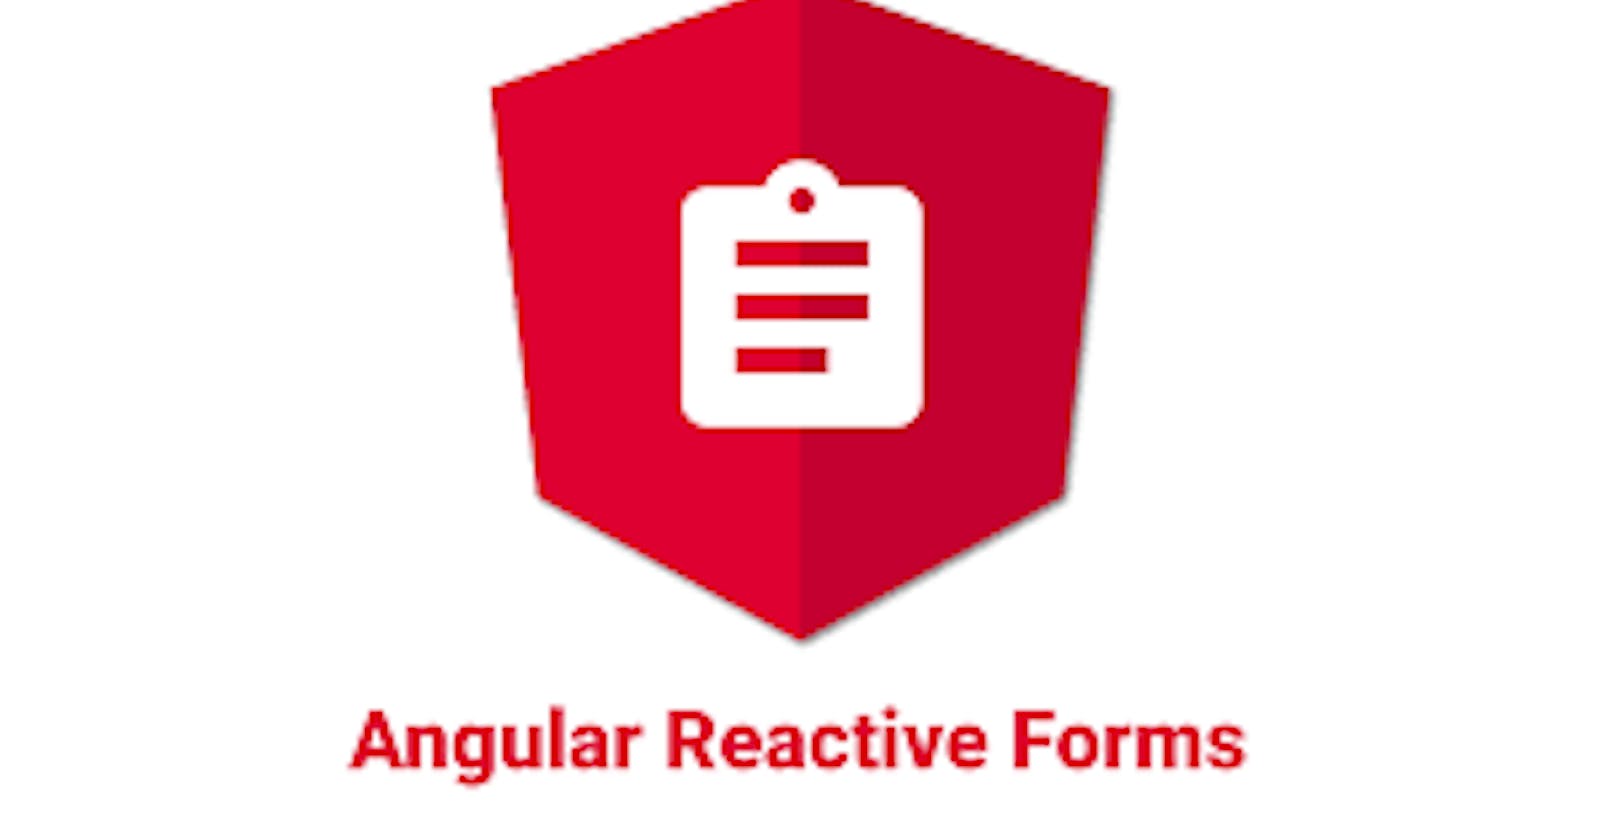 Angular reactive forms guide